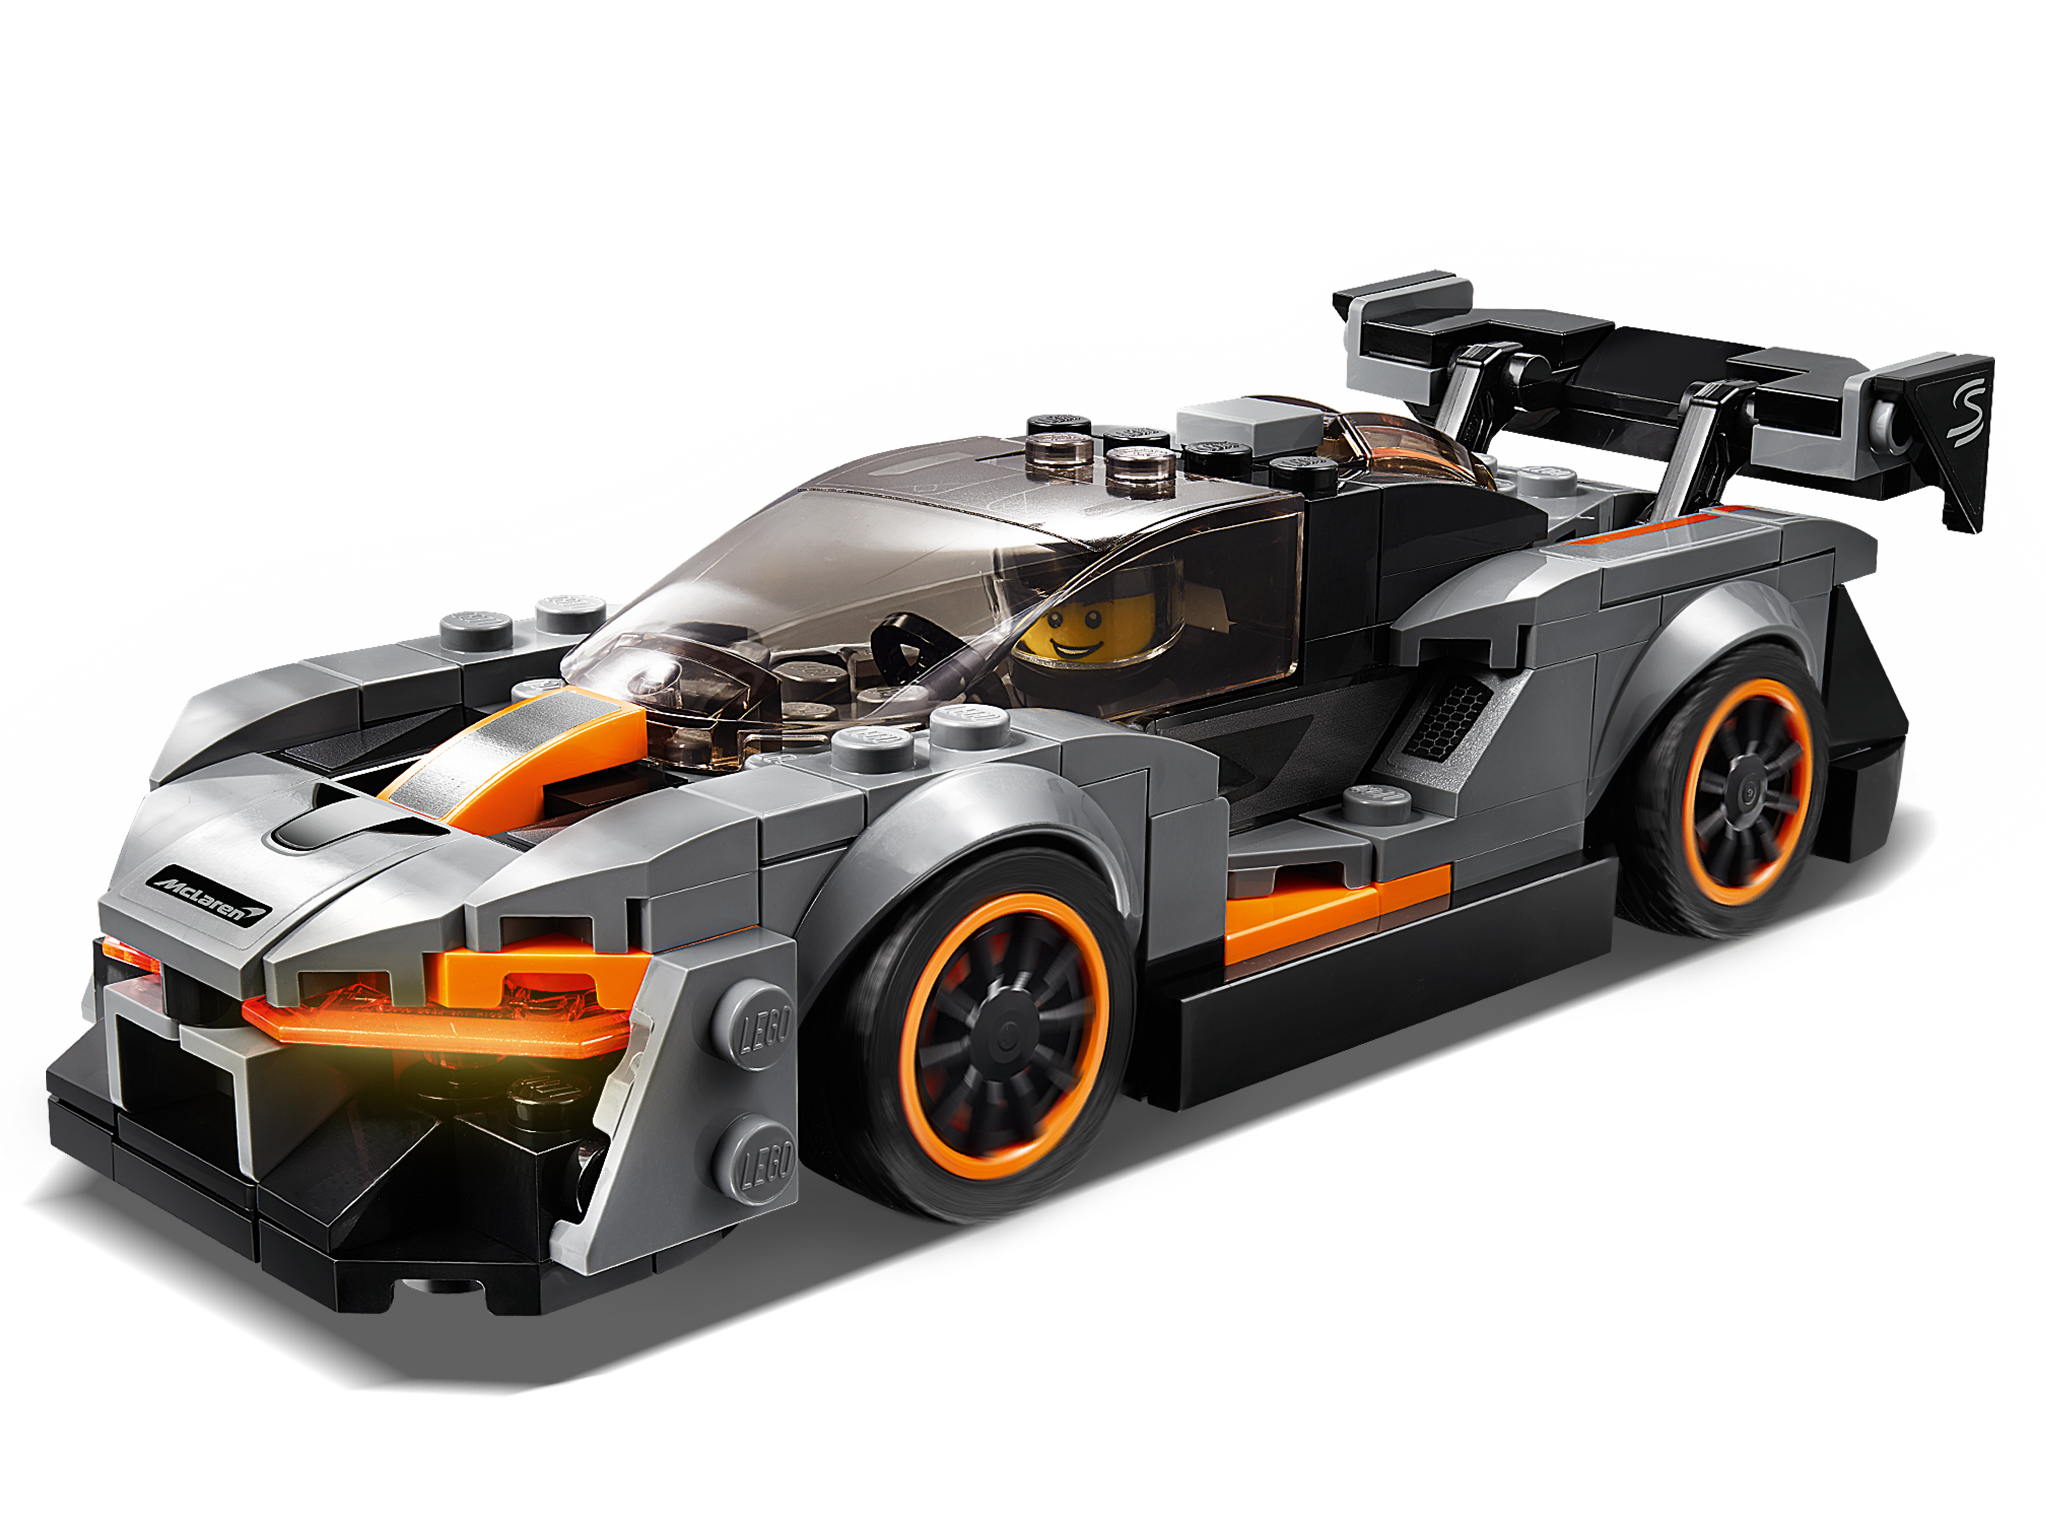 Details about   LEGO Building Kit NEW 75892 Speed Champions McLaren Senna Model Racing Toy Car